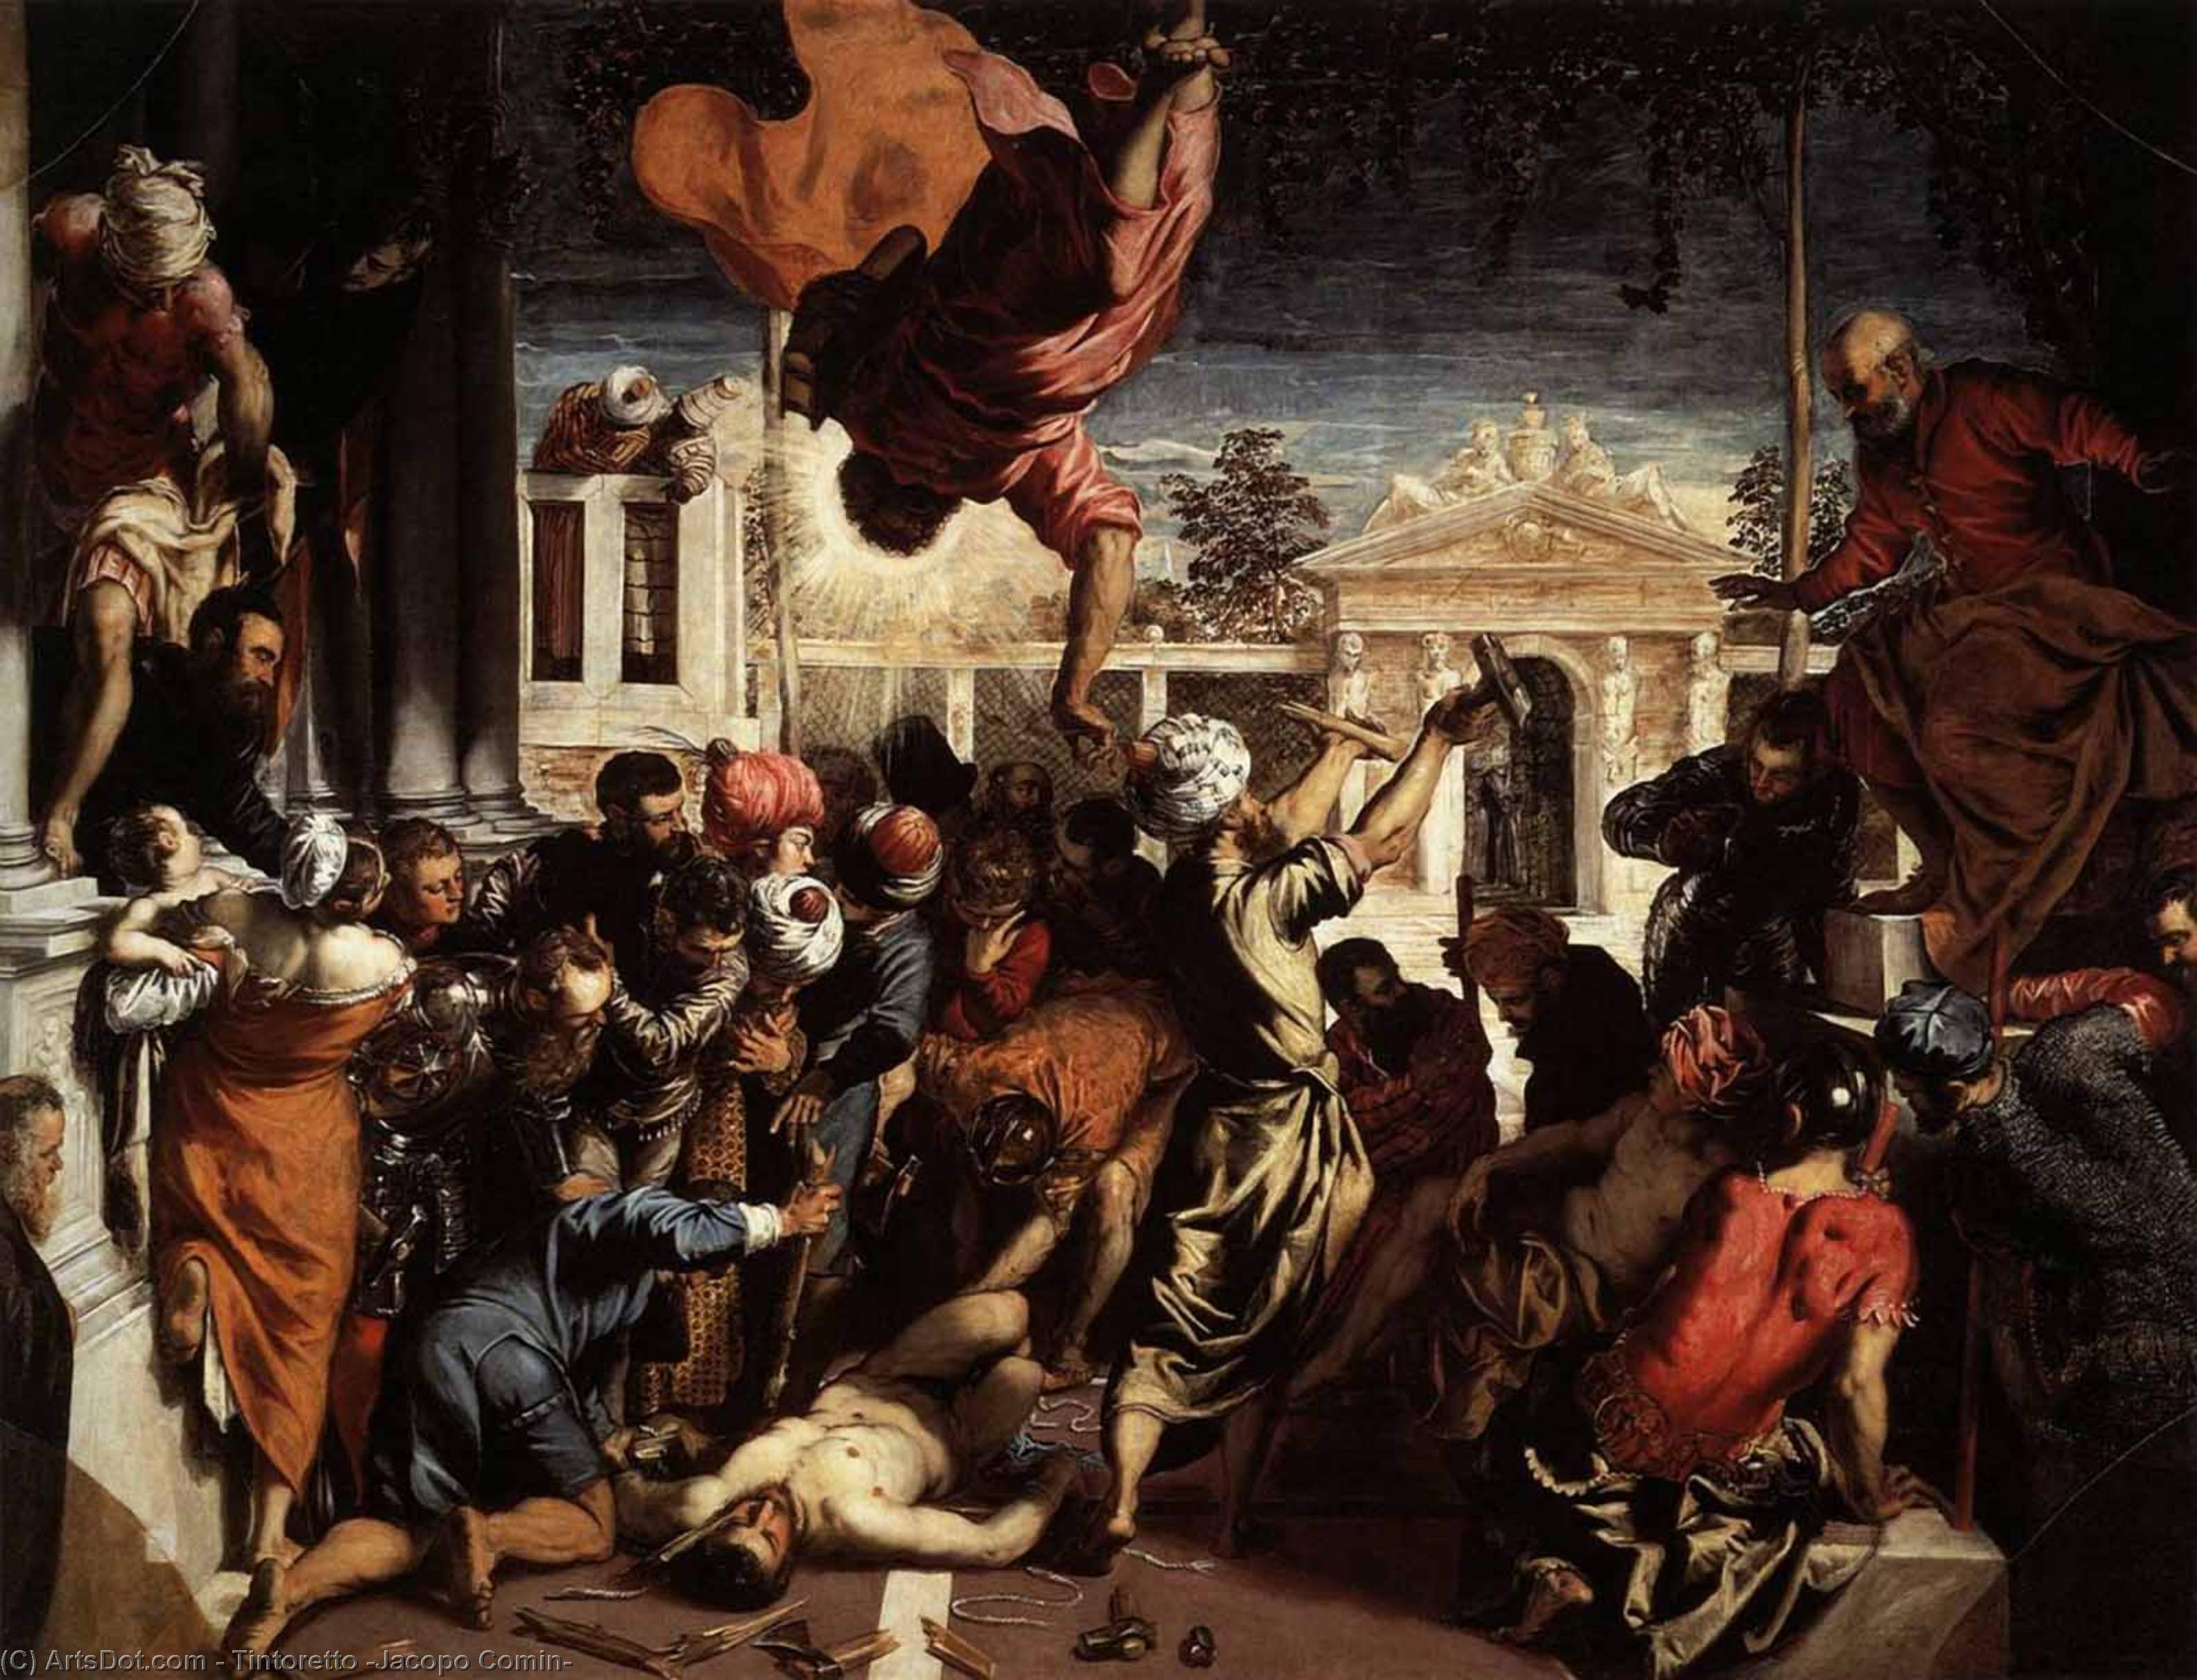 Order Oil Painting Replica The Miracle of St Mark Freeing the Slave, 1548 by Tintoretto (Jacopo Comin) (1518-1594, Italy) | ArtsDot.com